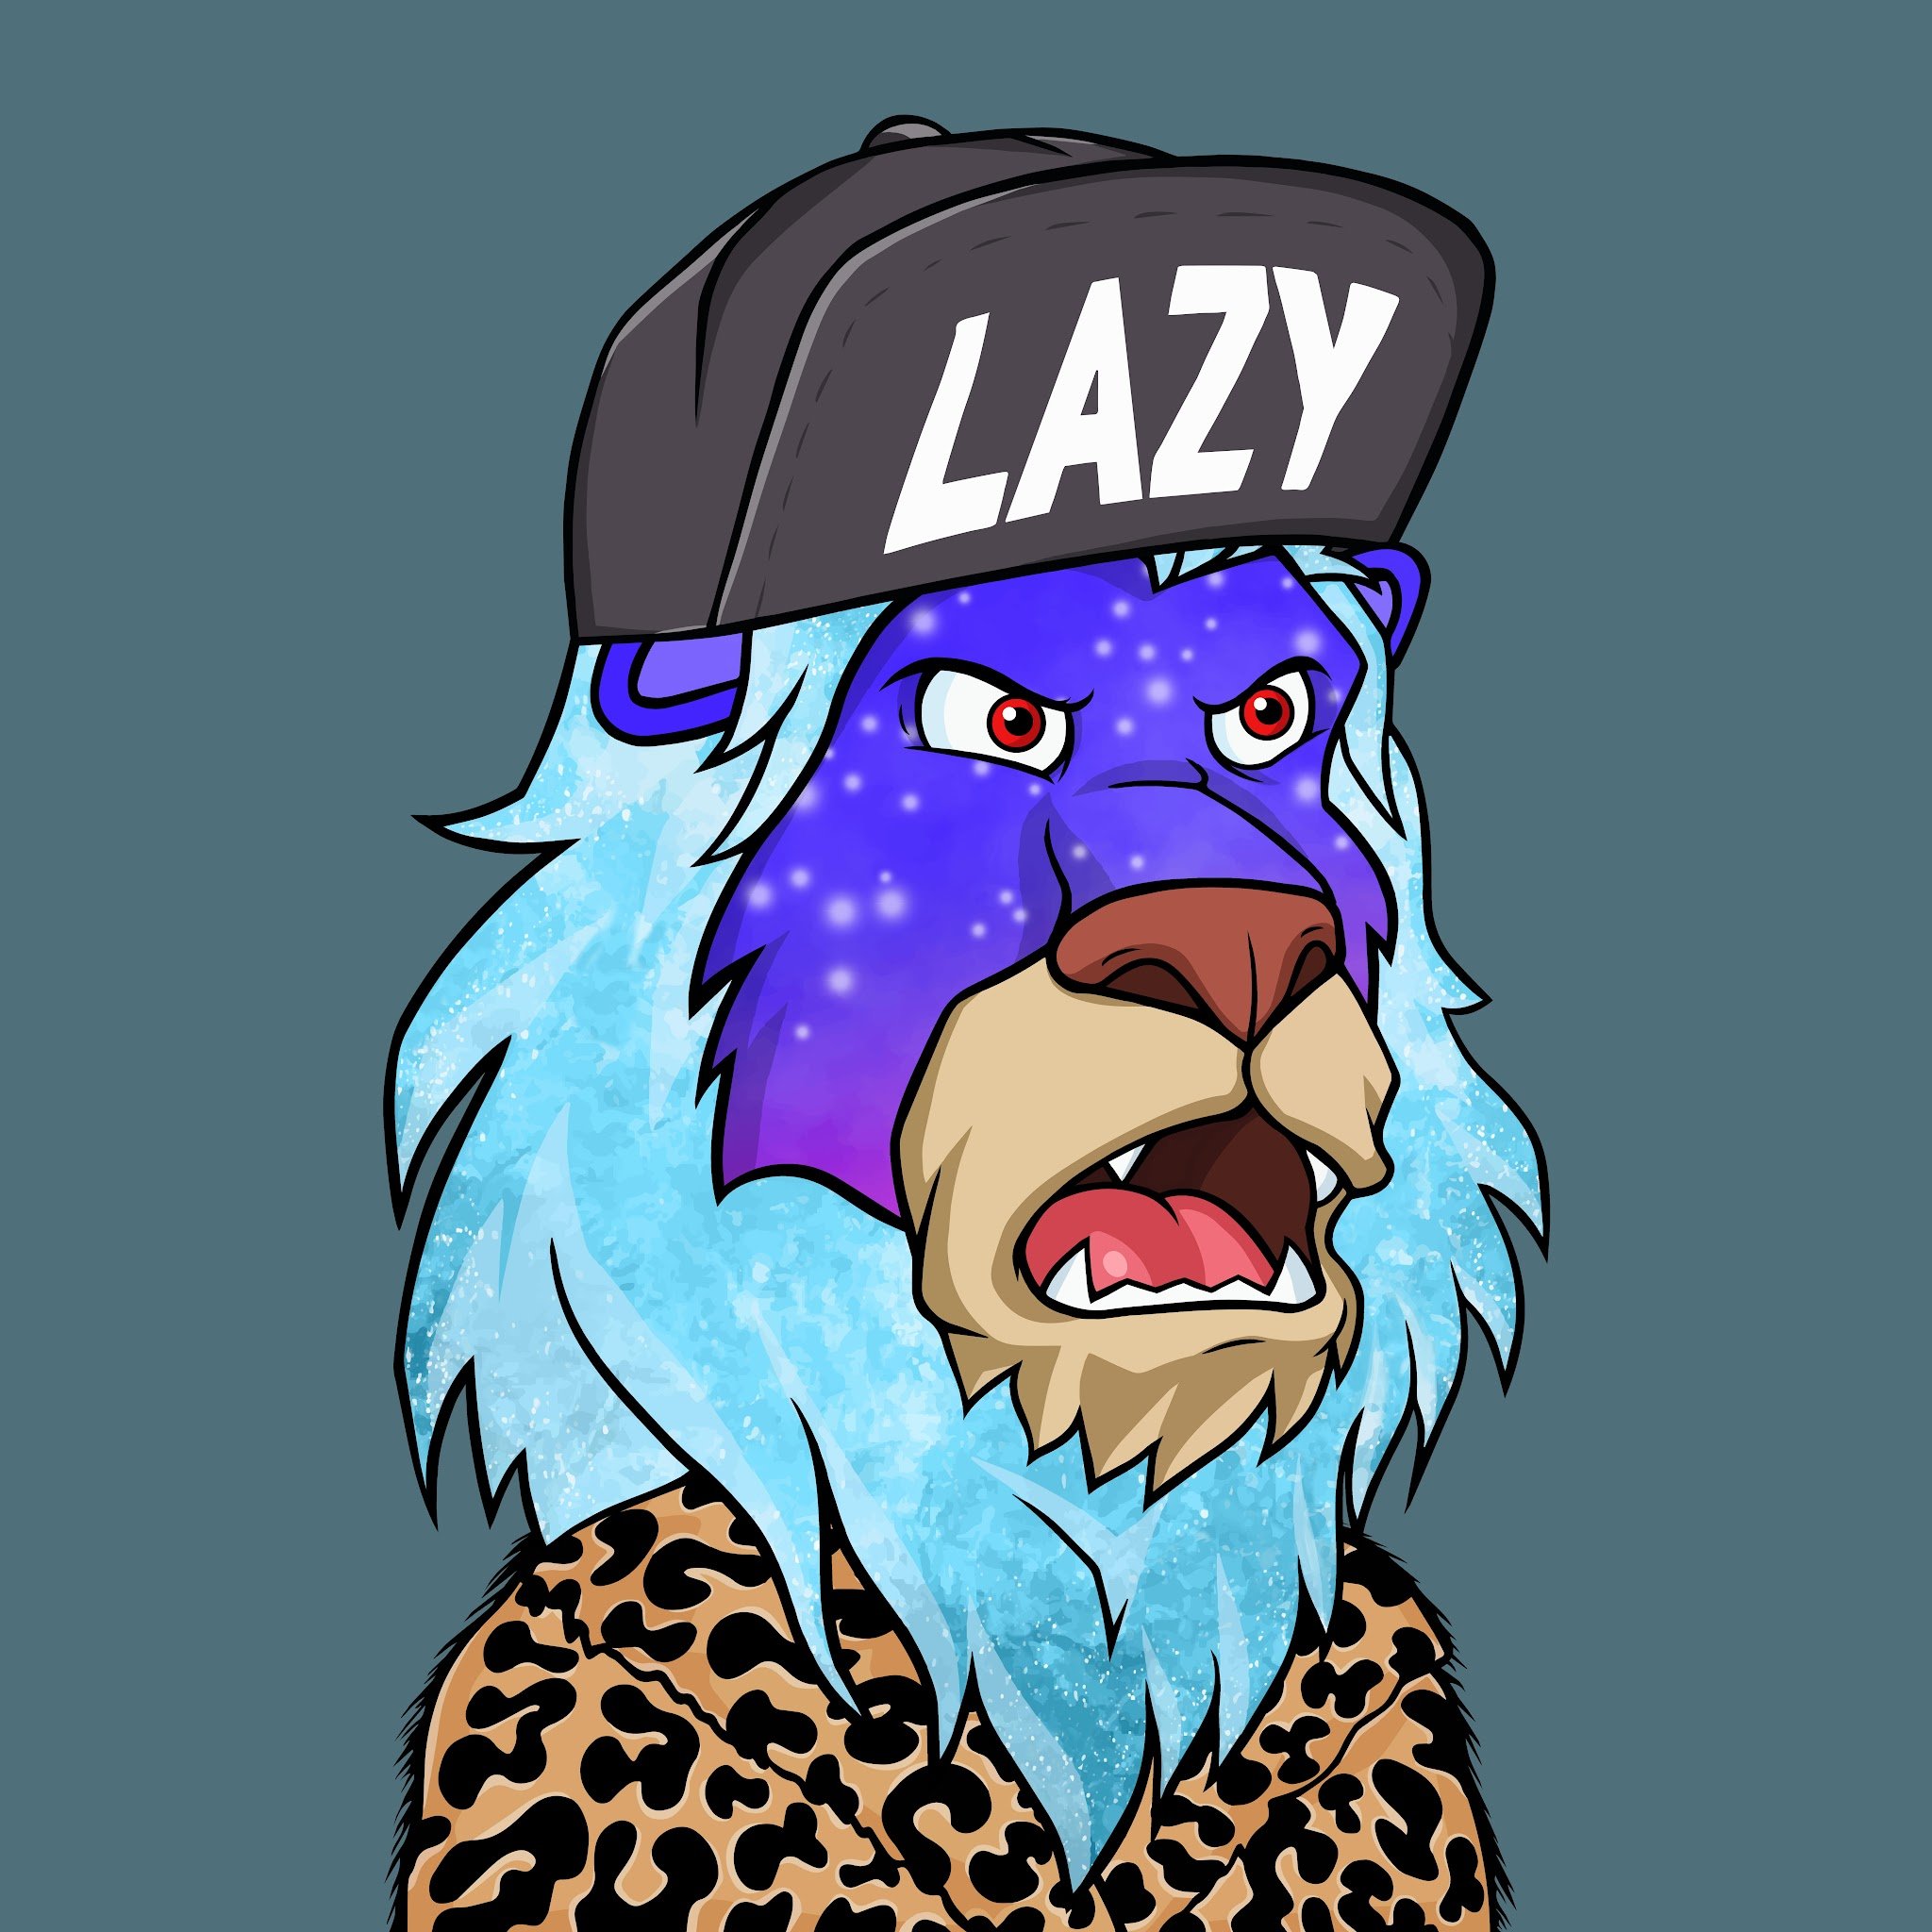 Wannabe crypto trader, absolute NFT degenerate. LAZY 🦁 #996 #7655 | MAYC🦧 #1562 | SVS🧛‍♂️#3348 #8740 | 3LAU: Worst Case | Big Cats #2077 #2300 #2670